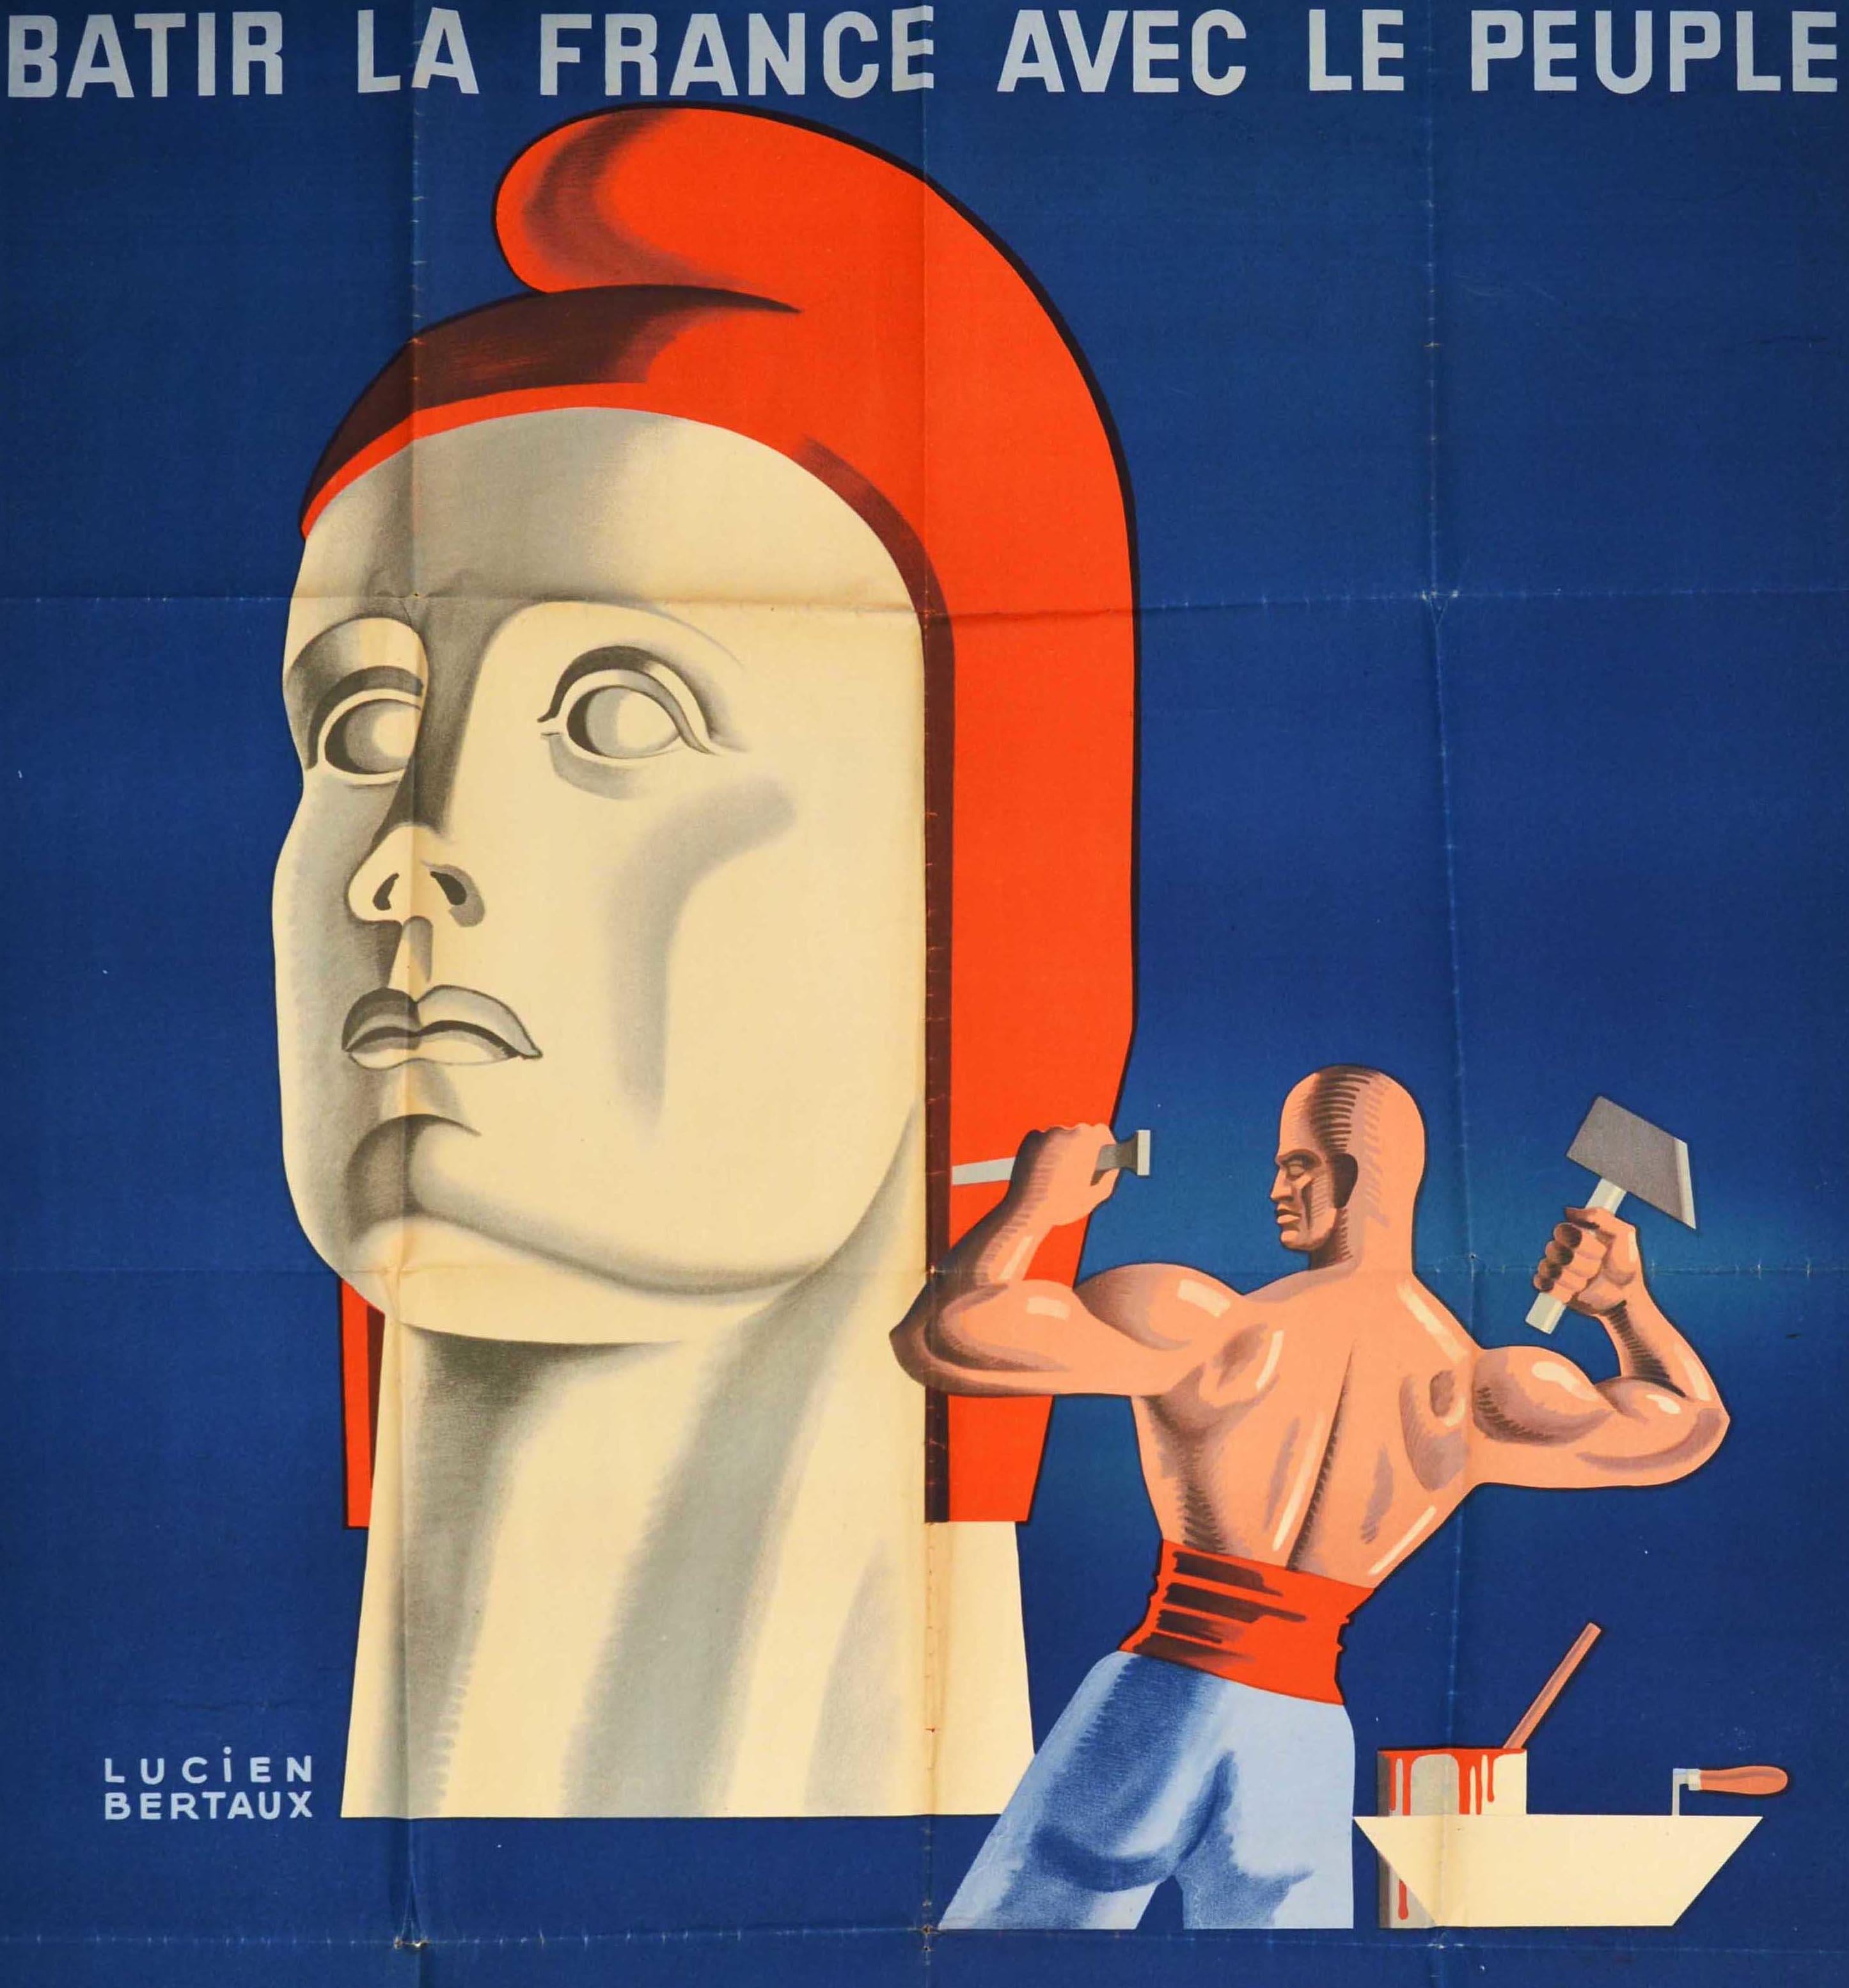 Original vintage election propaganda poster - Batir la France avec le peuple MRP Mouvement Republicain Populaire / Building France with the people Popular Republican Movement - featuring an illustration of a muscular sculptor working with a hammer